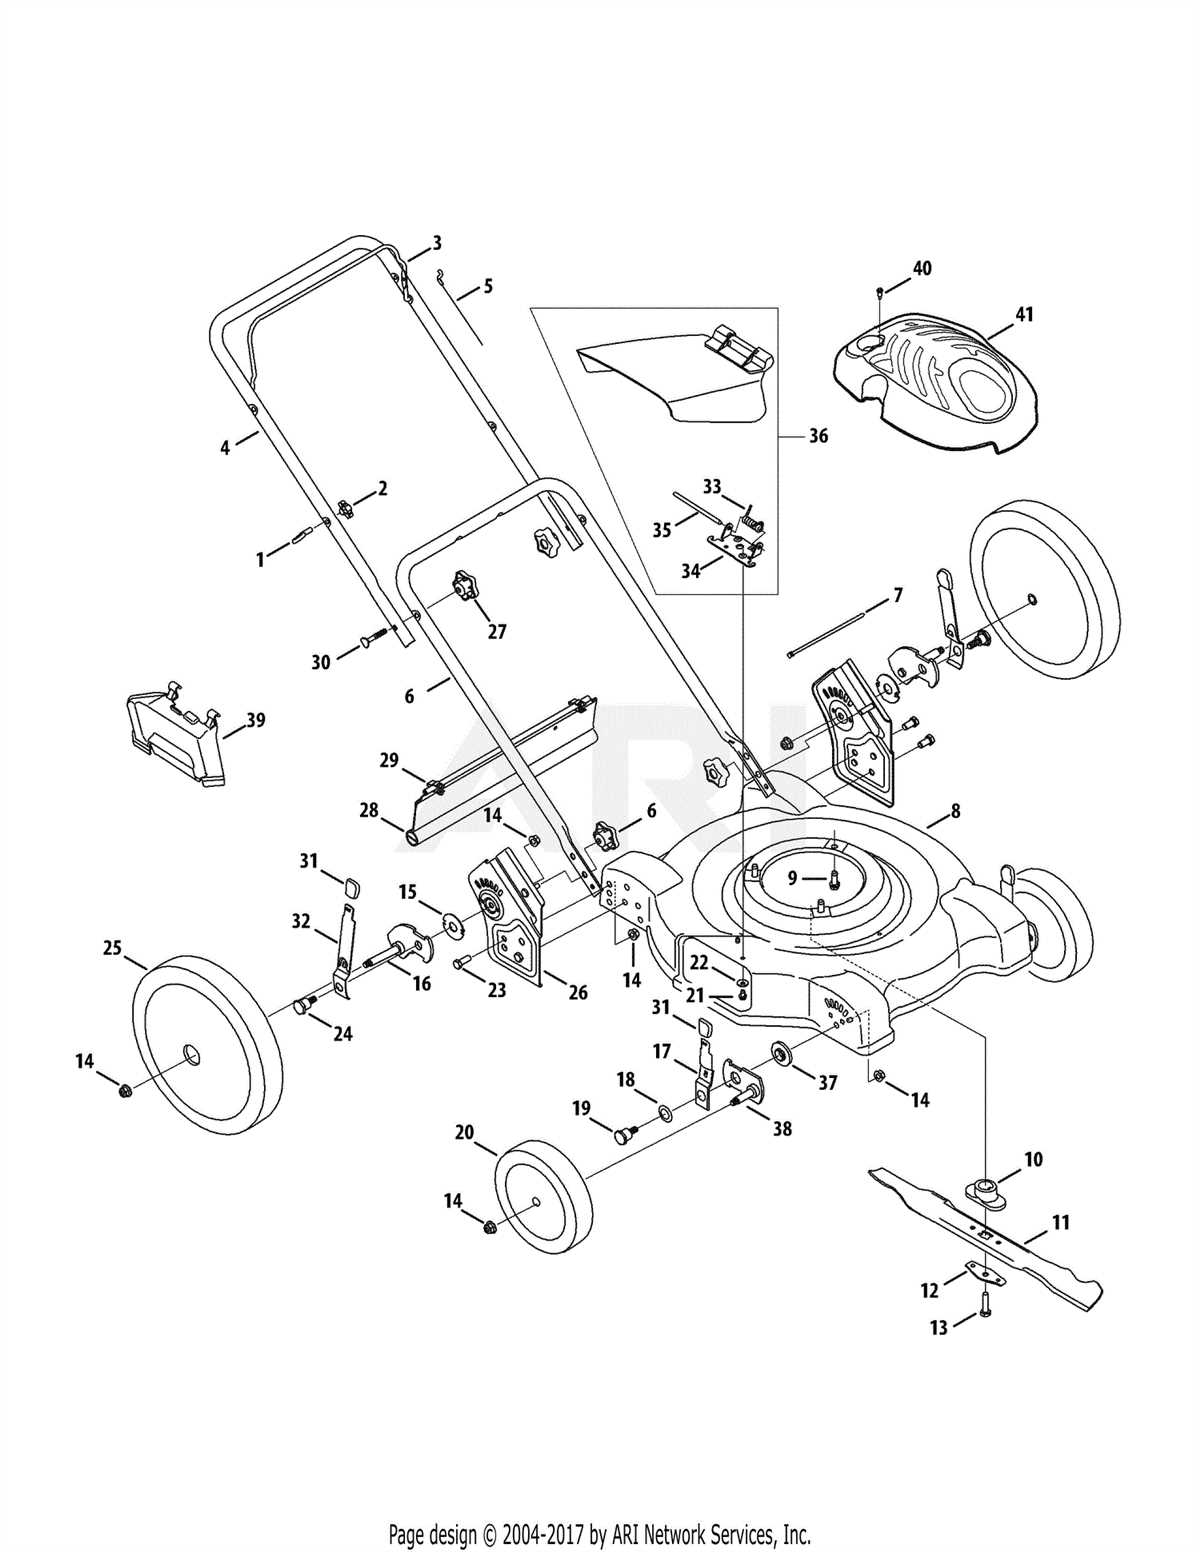 What is a Yard Machines parts diagram and why is it important?